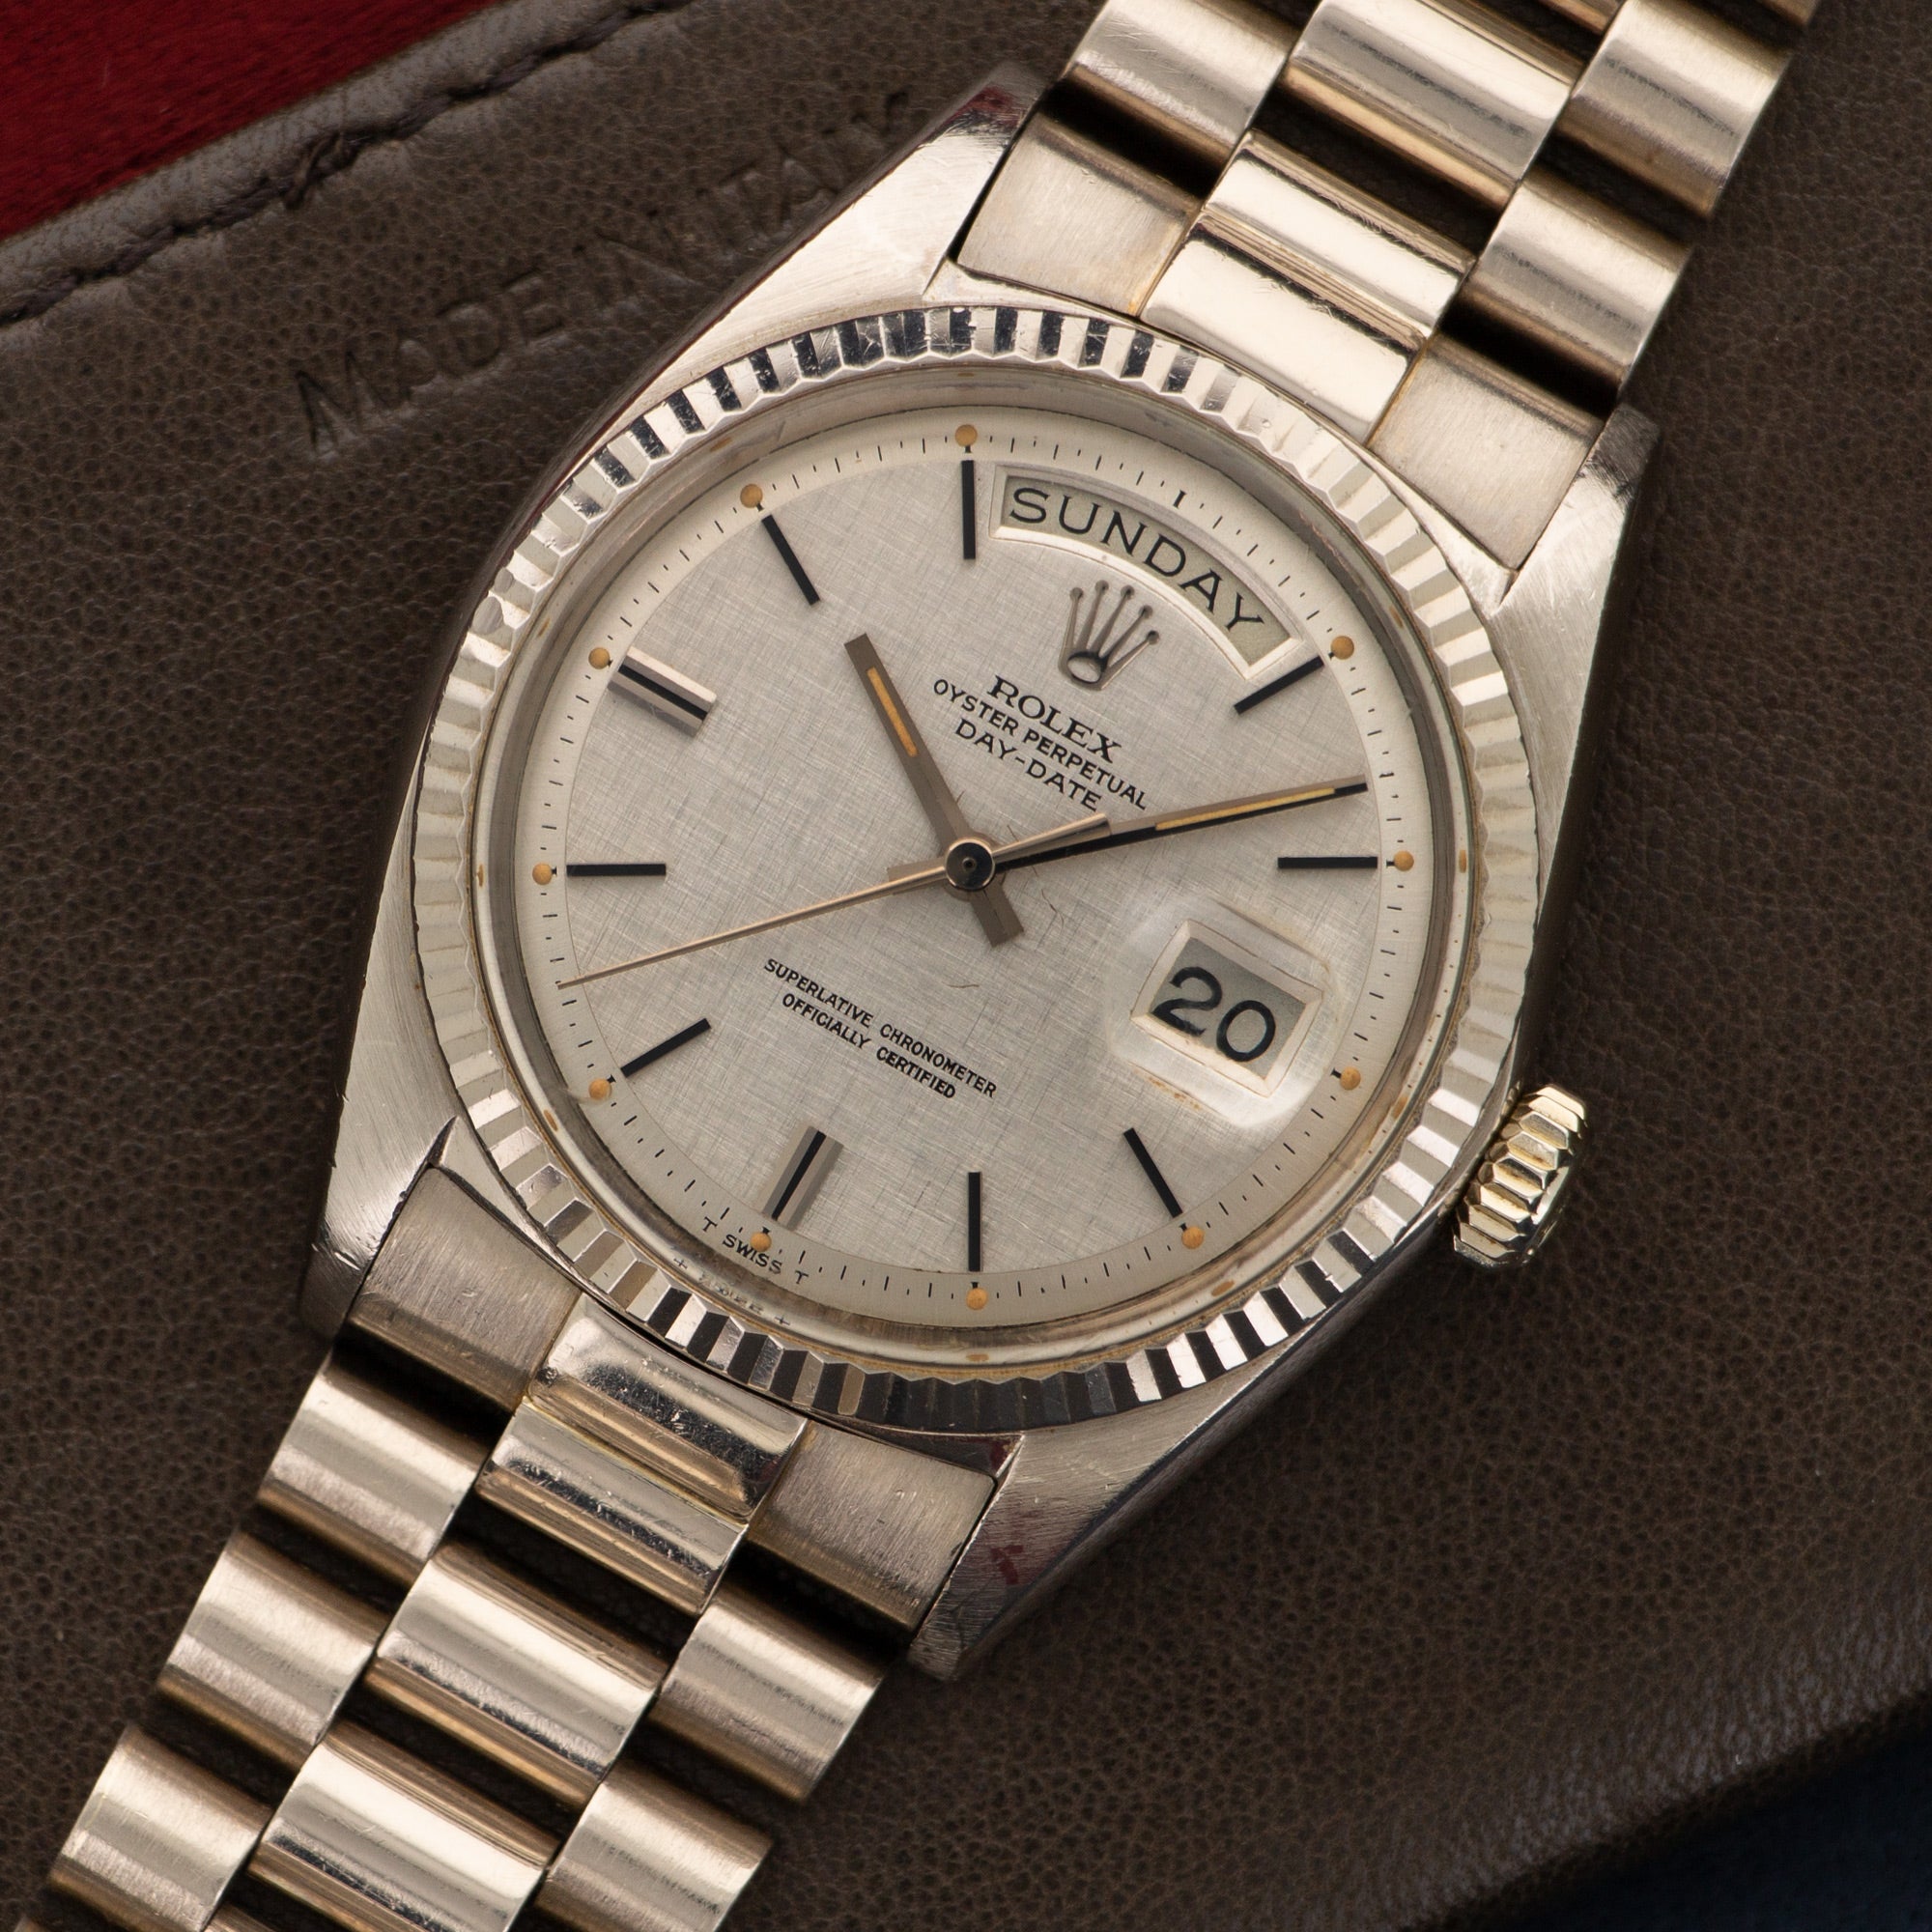 Rolex - Rolex White Gold Day-Date Watch Ref. 1803, from 1972 - The Keystone Watches